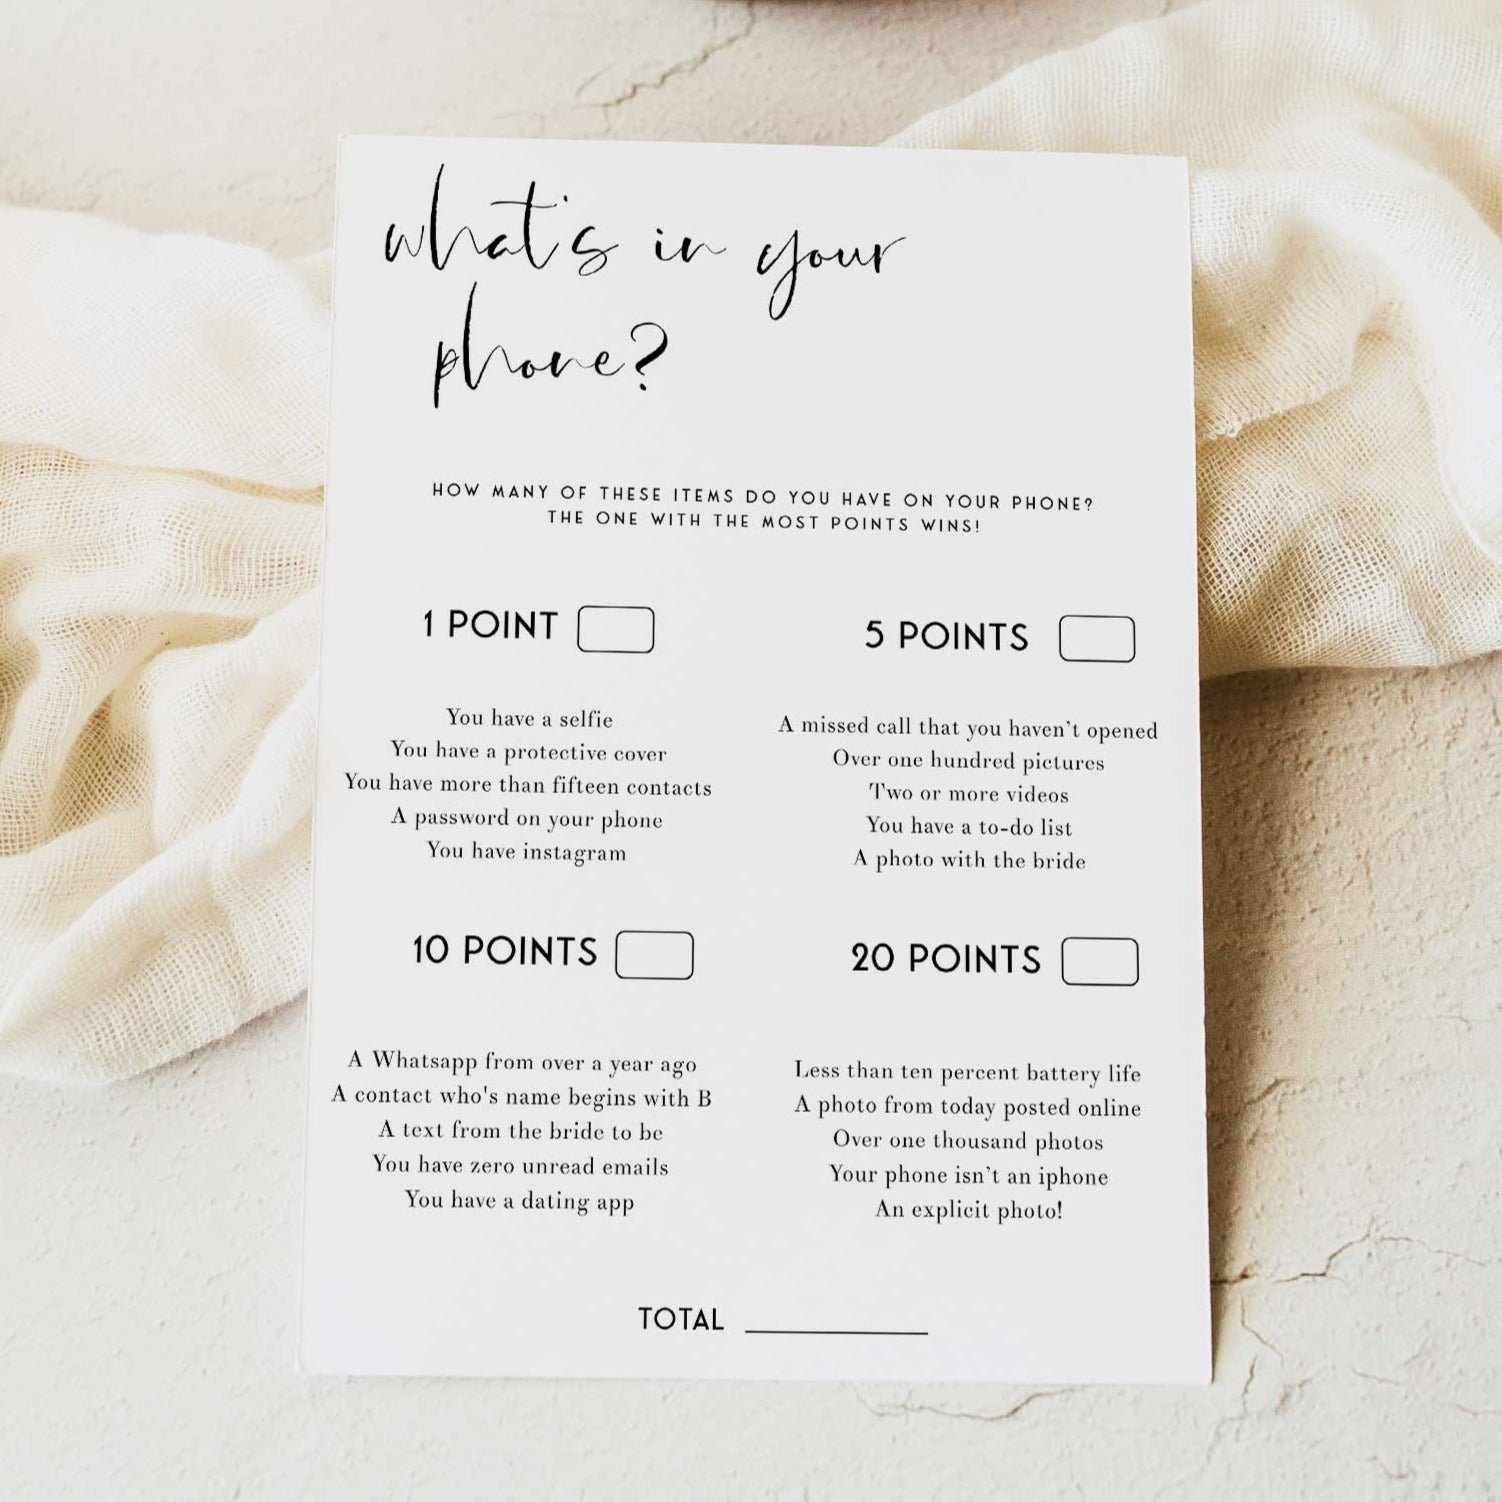 Fully editable and printable bridal shower what's in your phone game with a modern minimalist design. Perfect for a modern simple bridal shower themed party